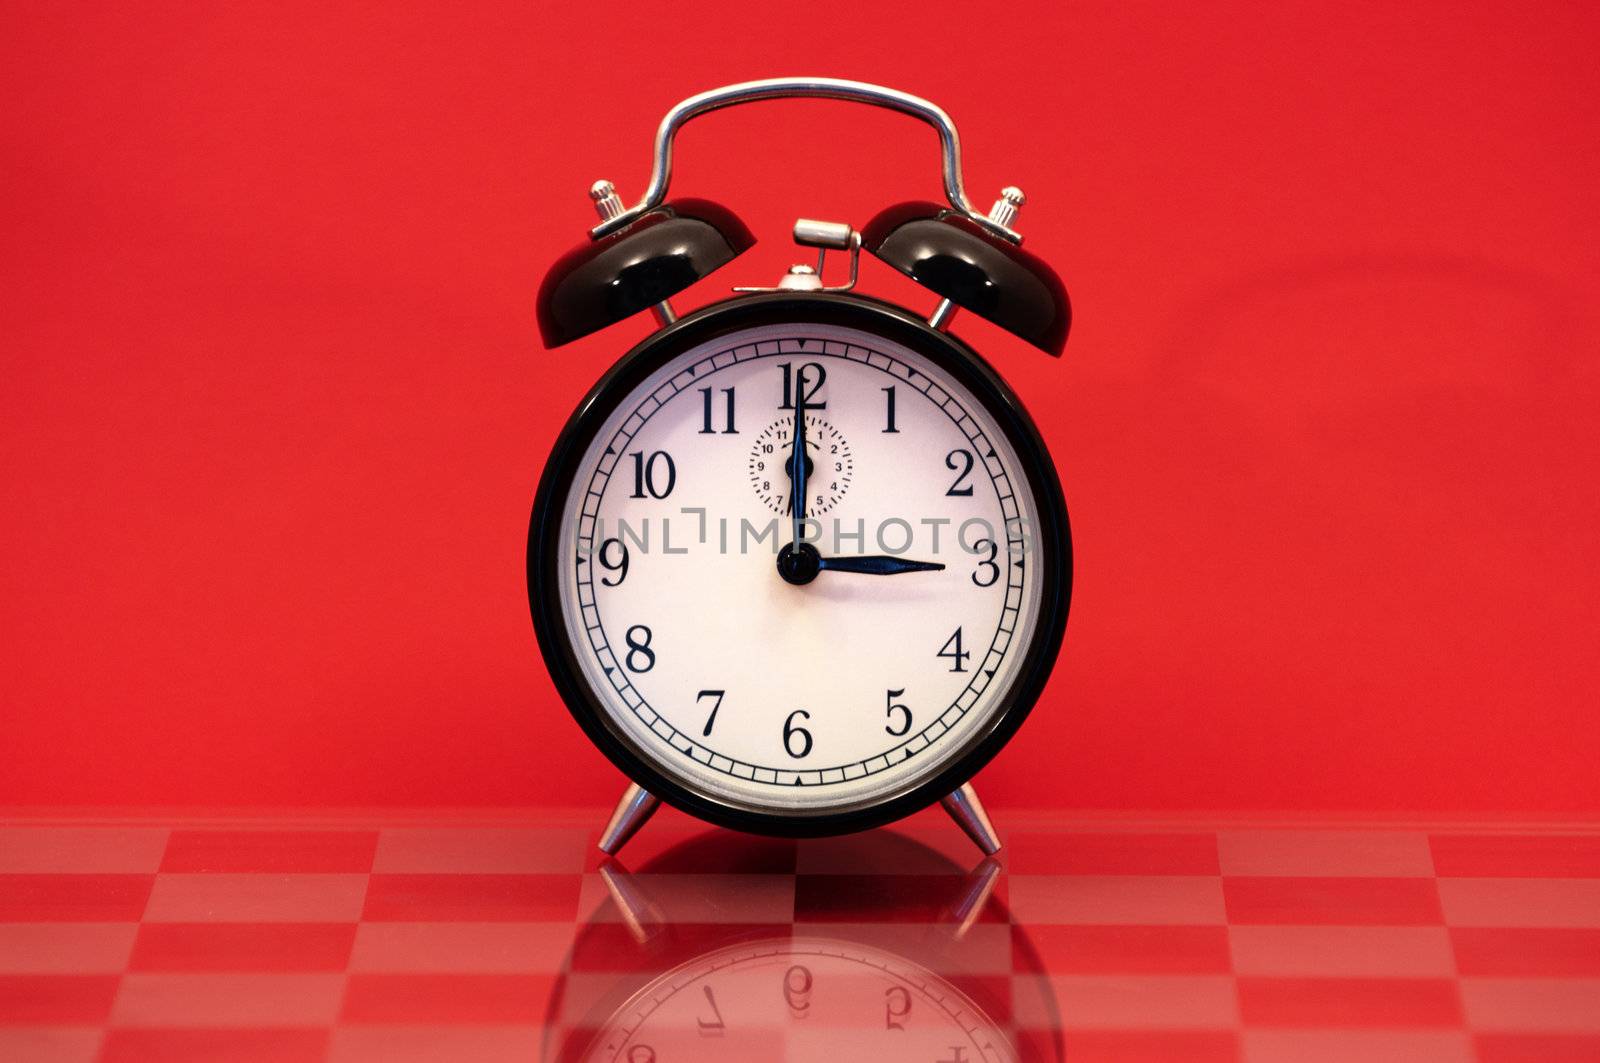 Vintage Alarm Clock Showing 3 O'Clock Isolated on a Red Background.